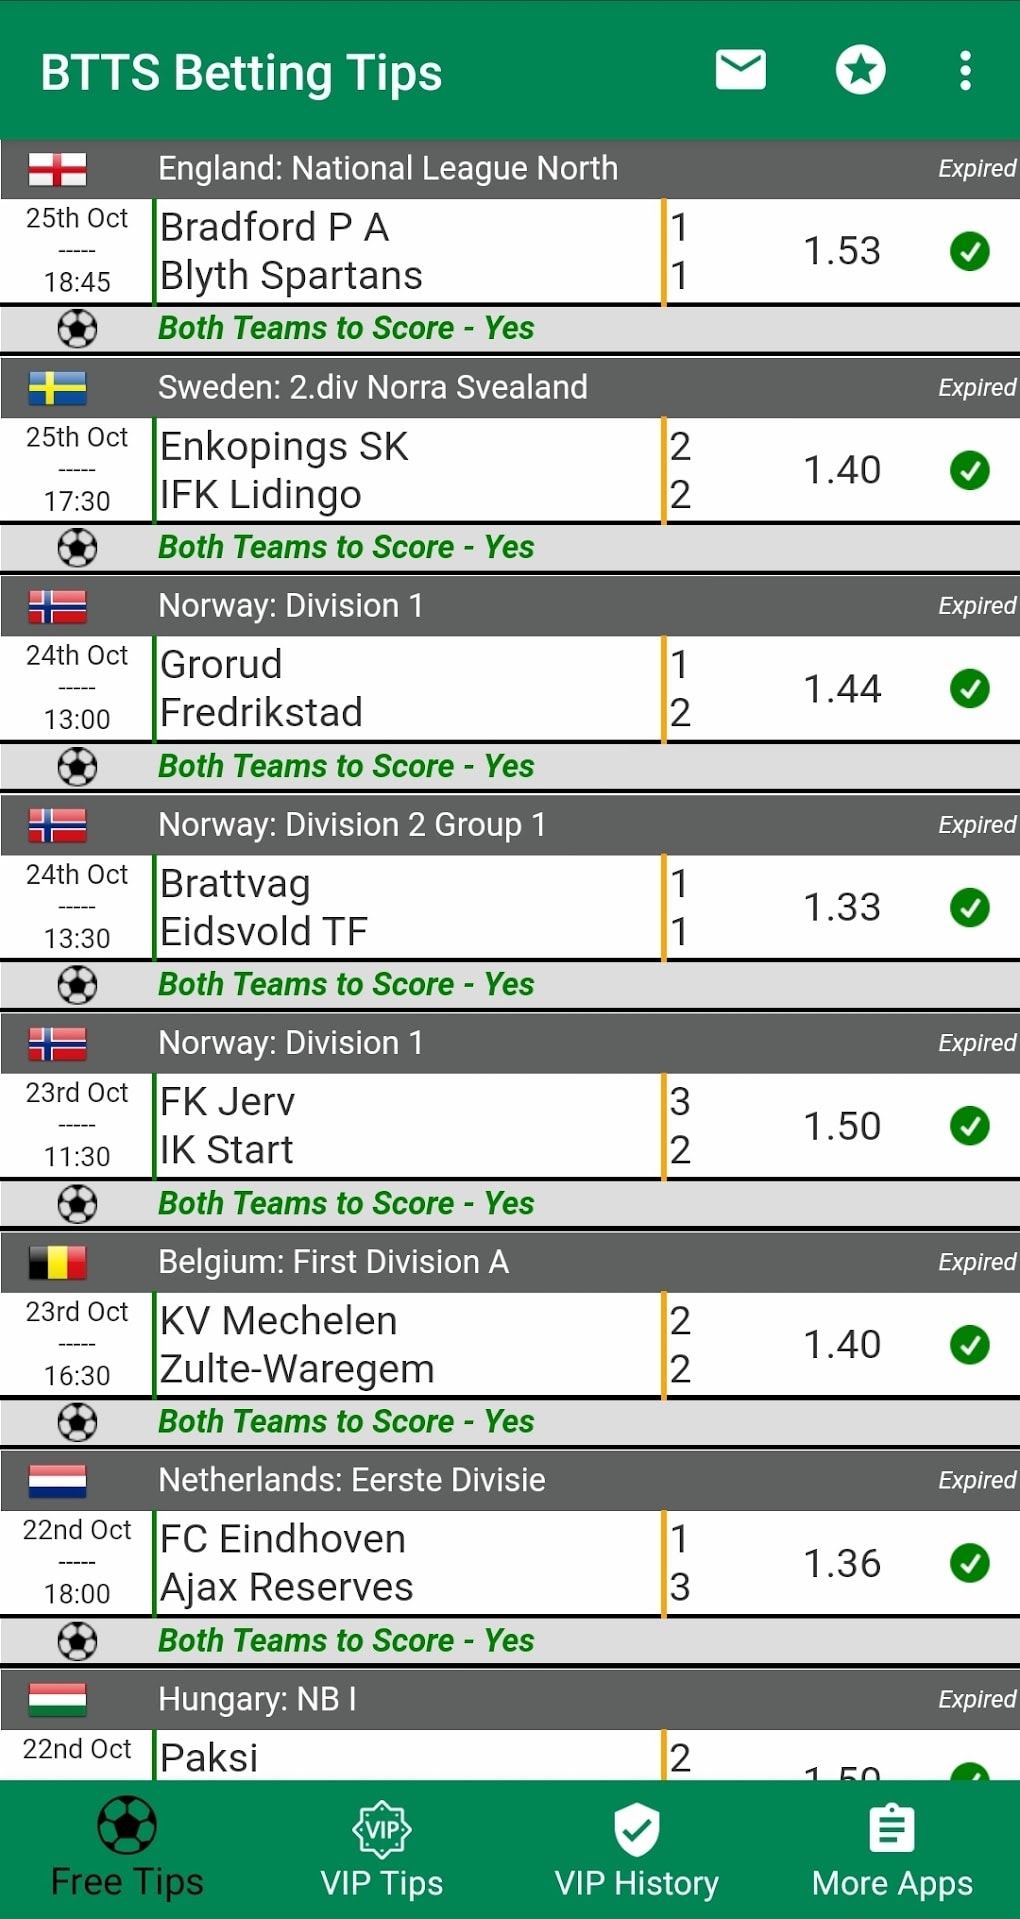 Both Teams to Score Tips - Today's BTTS Tips and Predictions